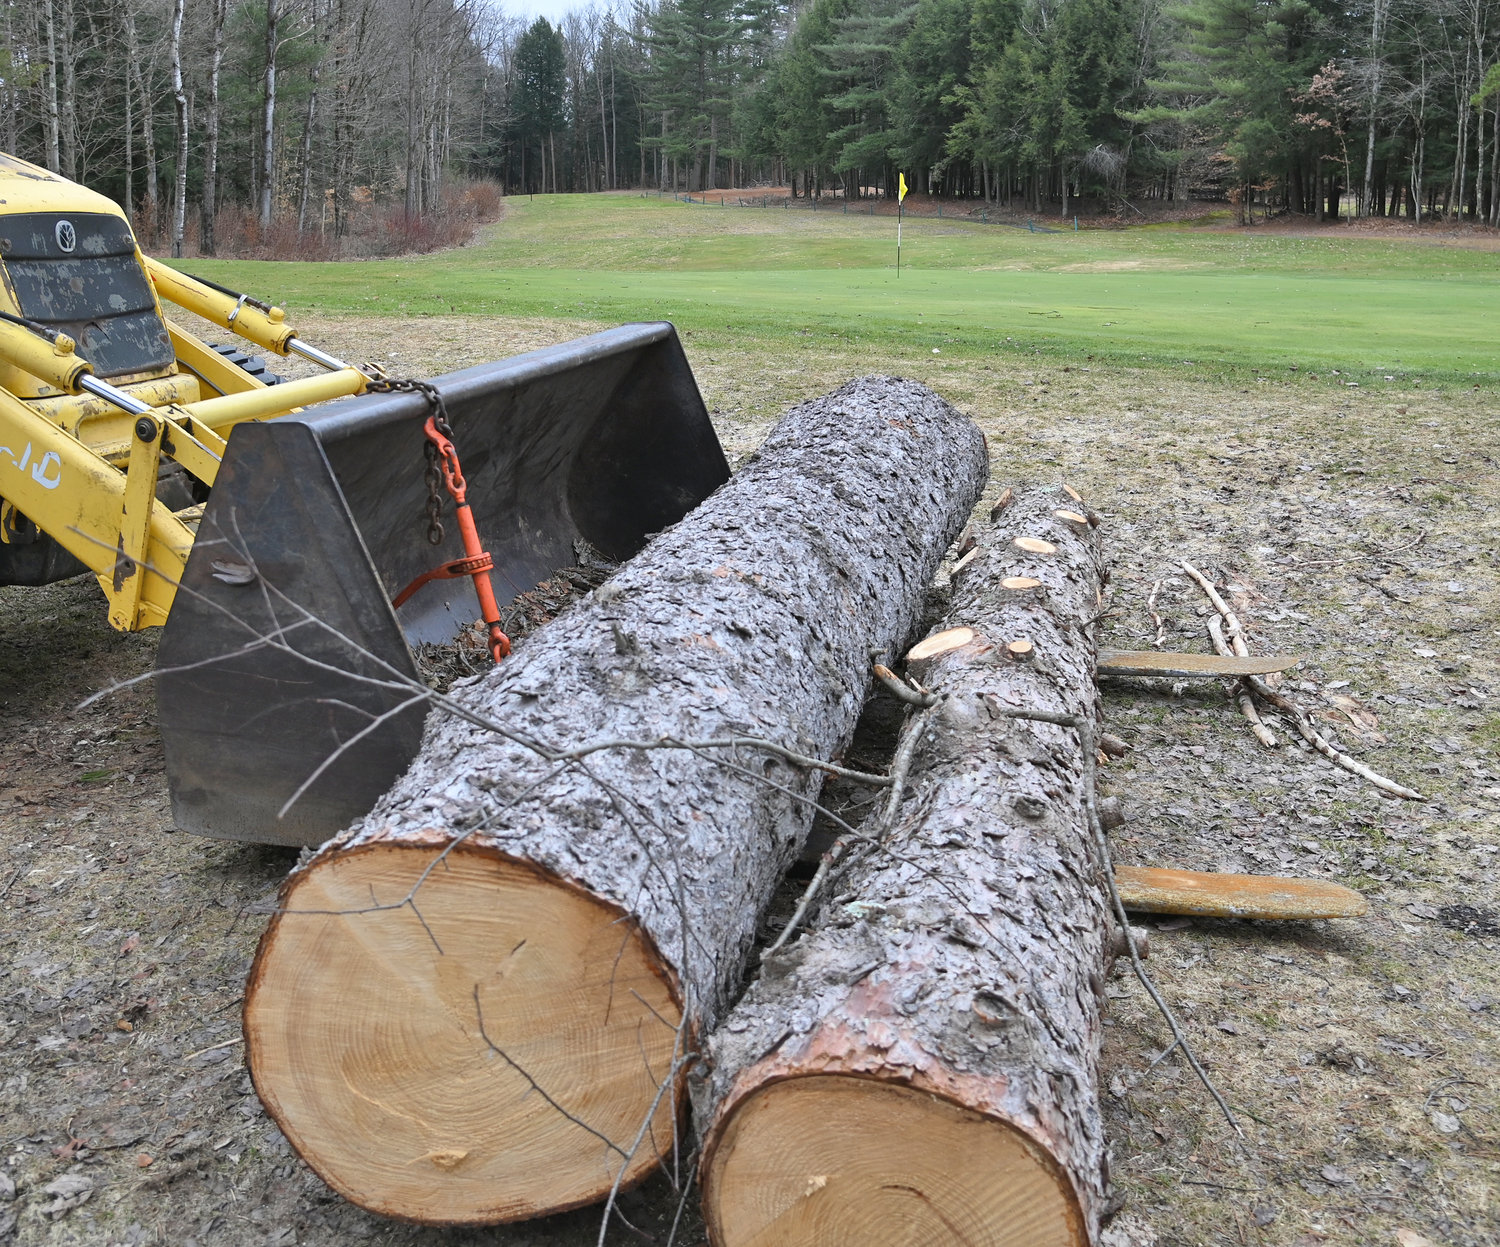 Rome Country Club trees cut down to clean up areas around greens. This is behind the 16th Par 3 green.